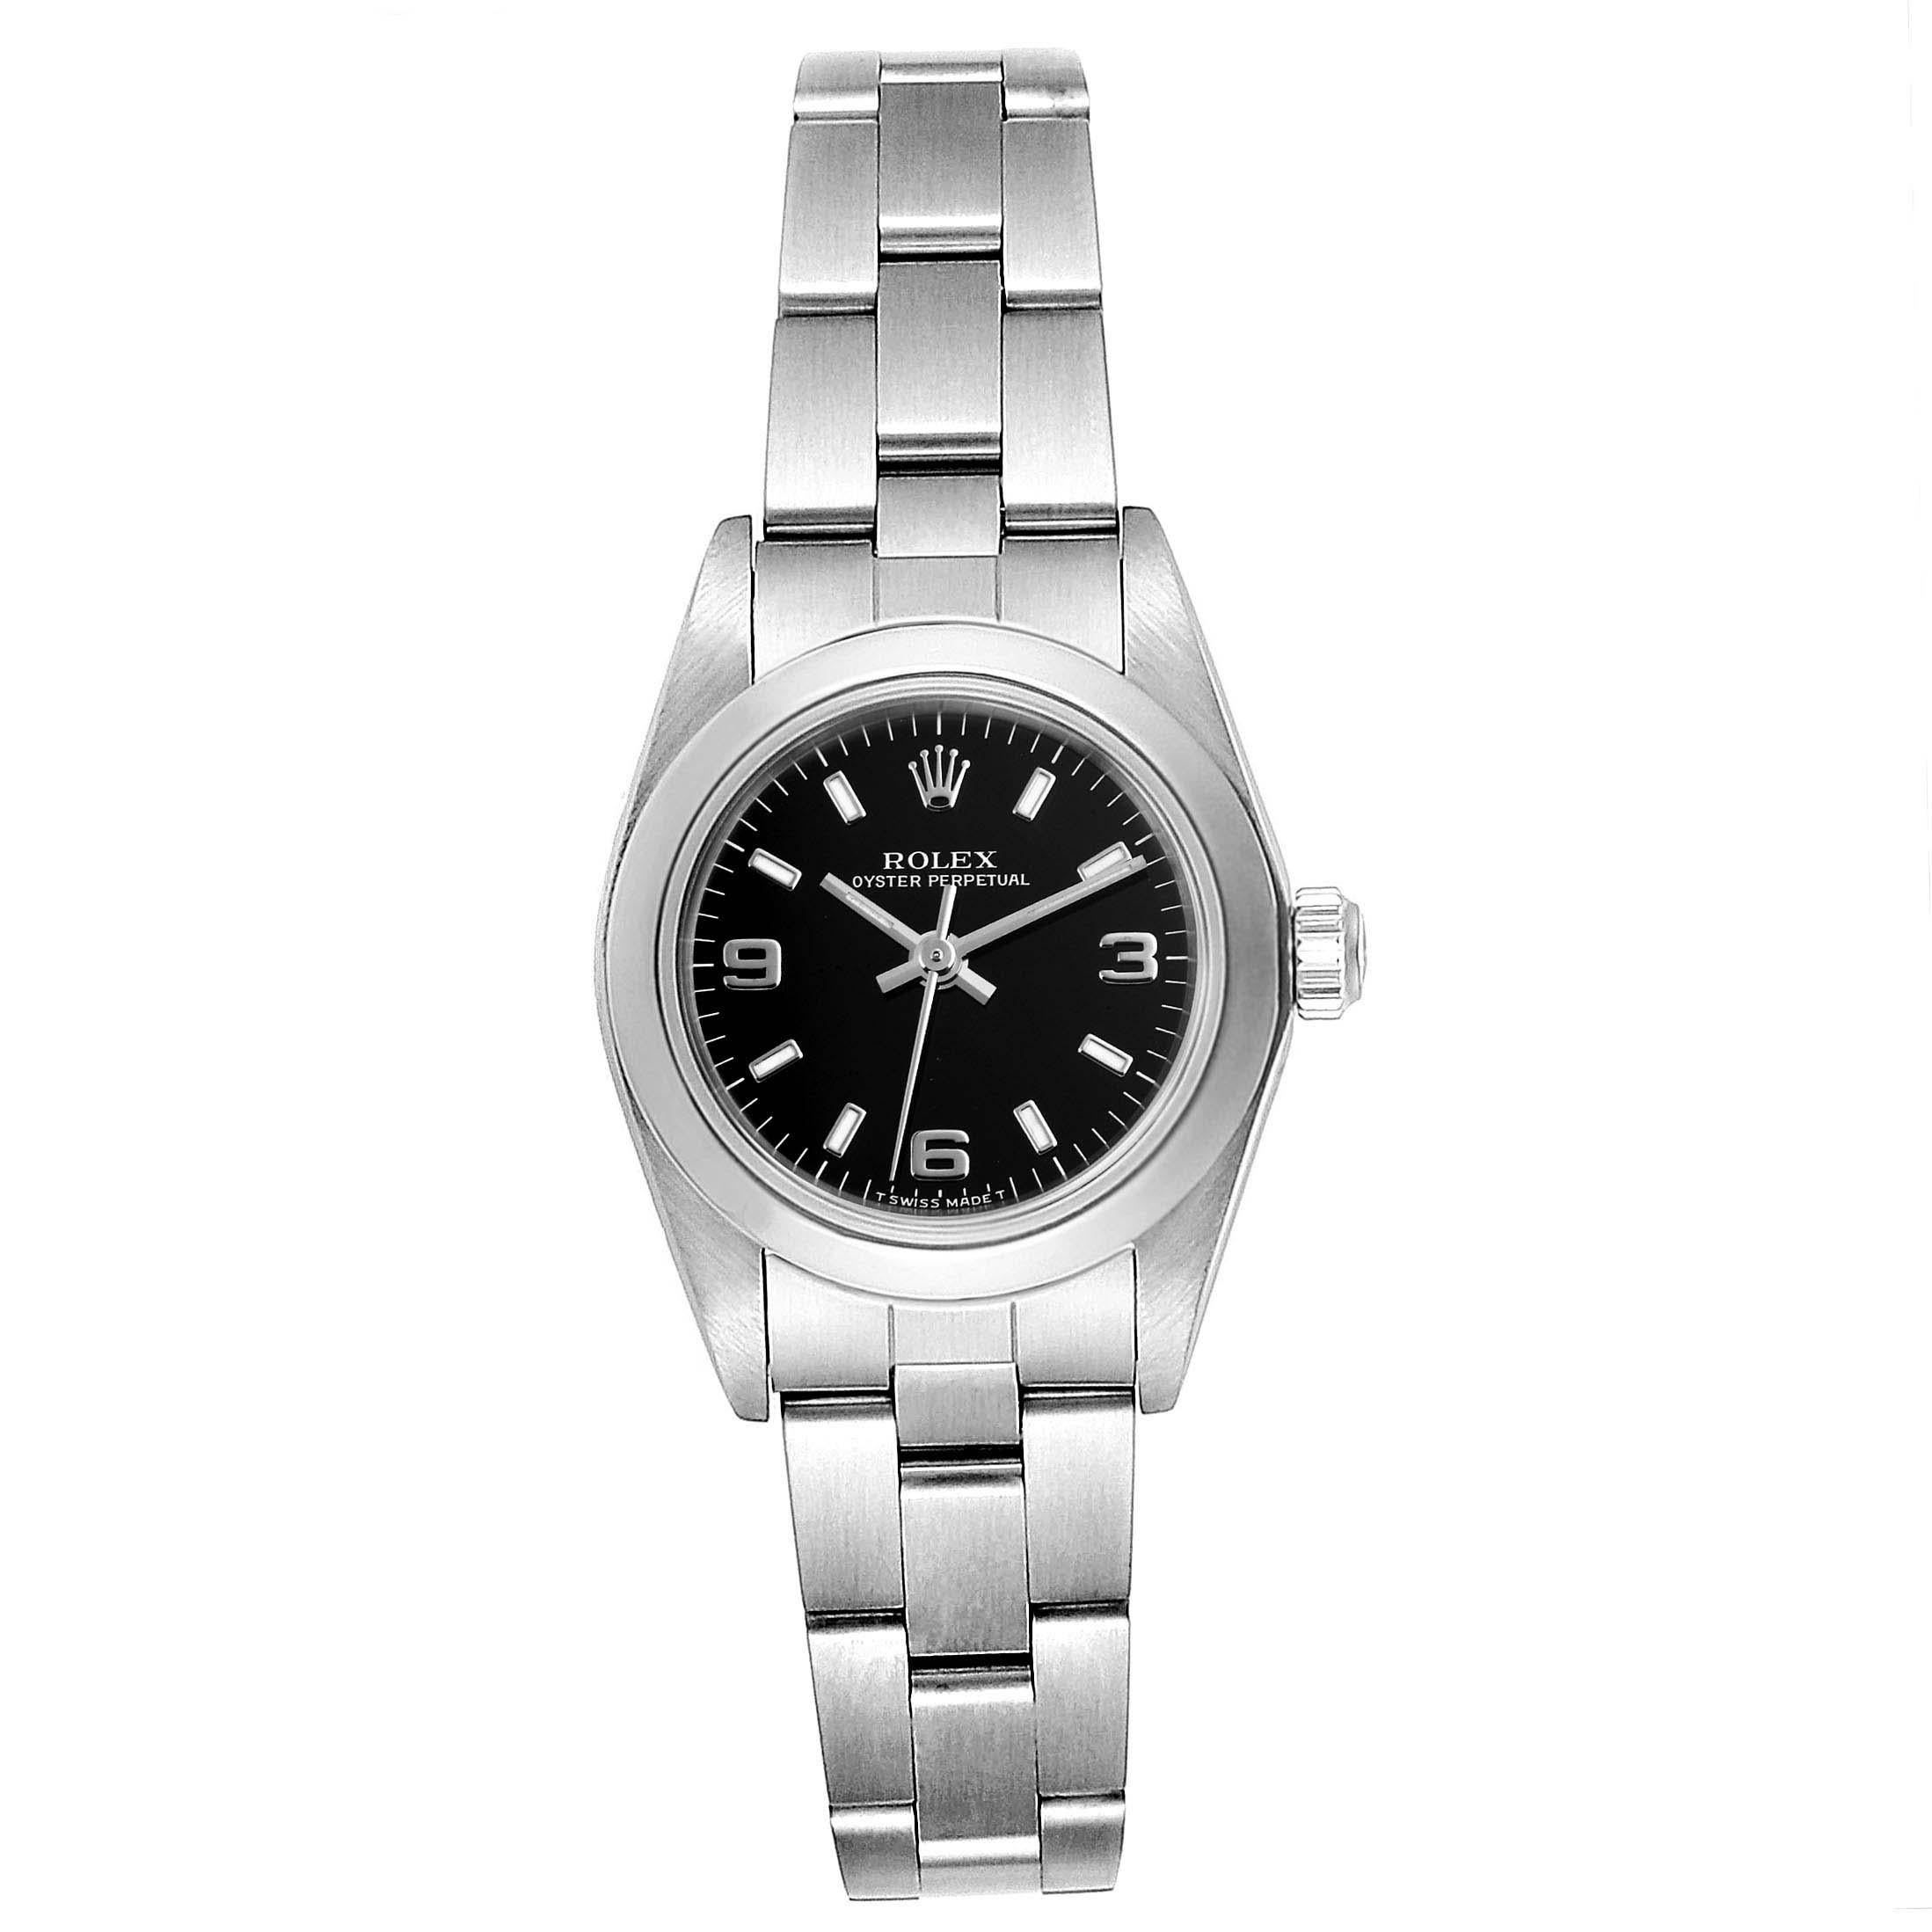 Rolex Oyster Perpetual Steel Black Dial Ladies Watch 67180 Box Papers. Officially certified chronometer self-winding movement. Stainless steel oyster case 24.0 mm in diameter. Rolex logo on a crown. Stainless steel smooth domed bezel. Scratch